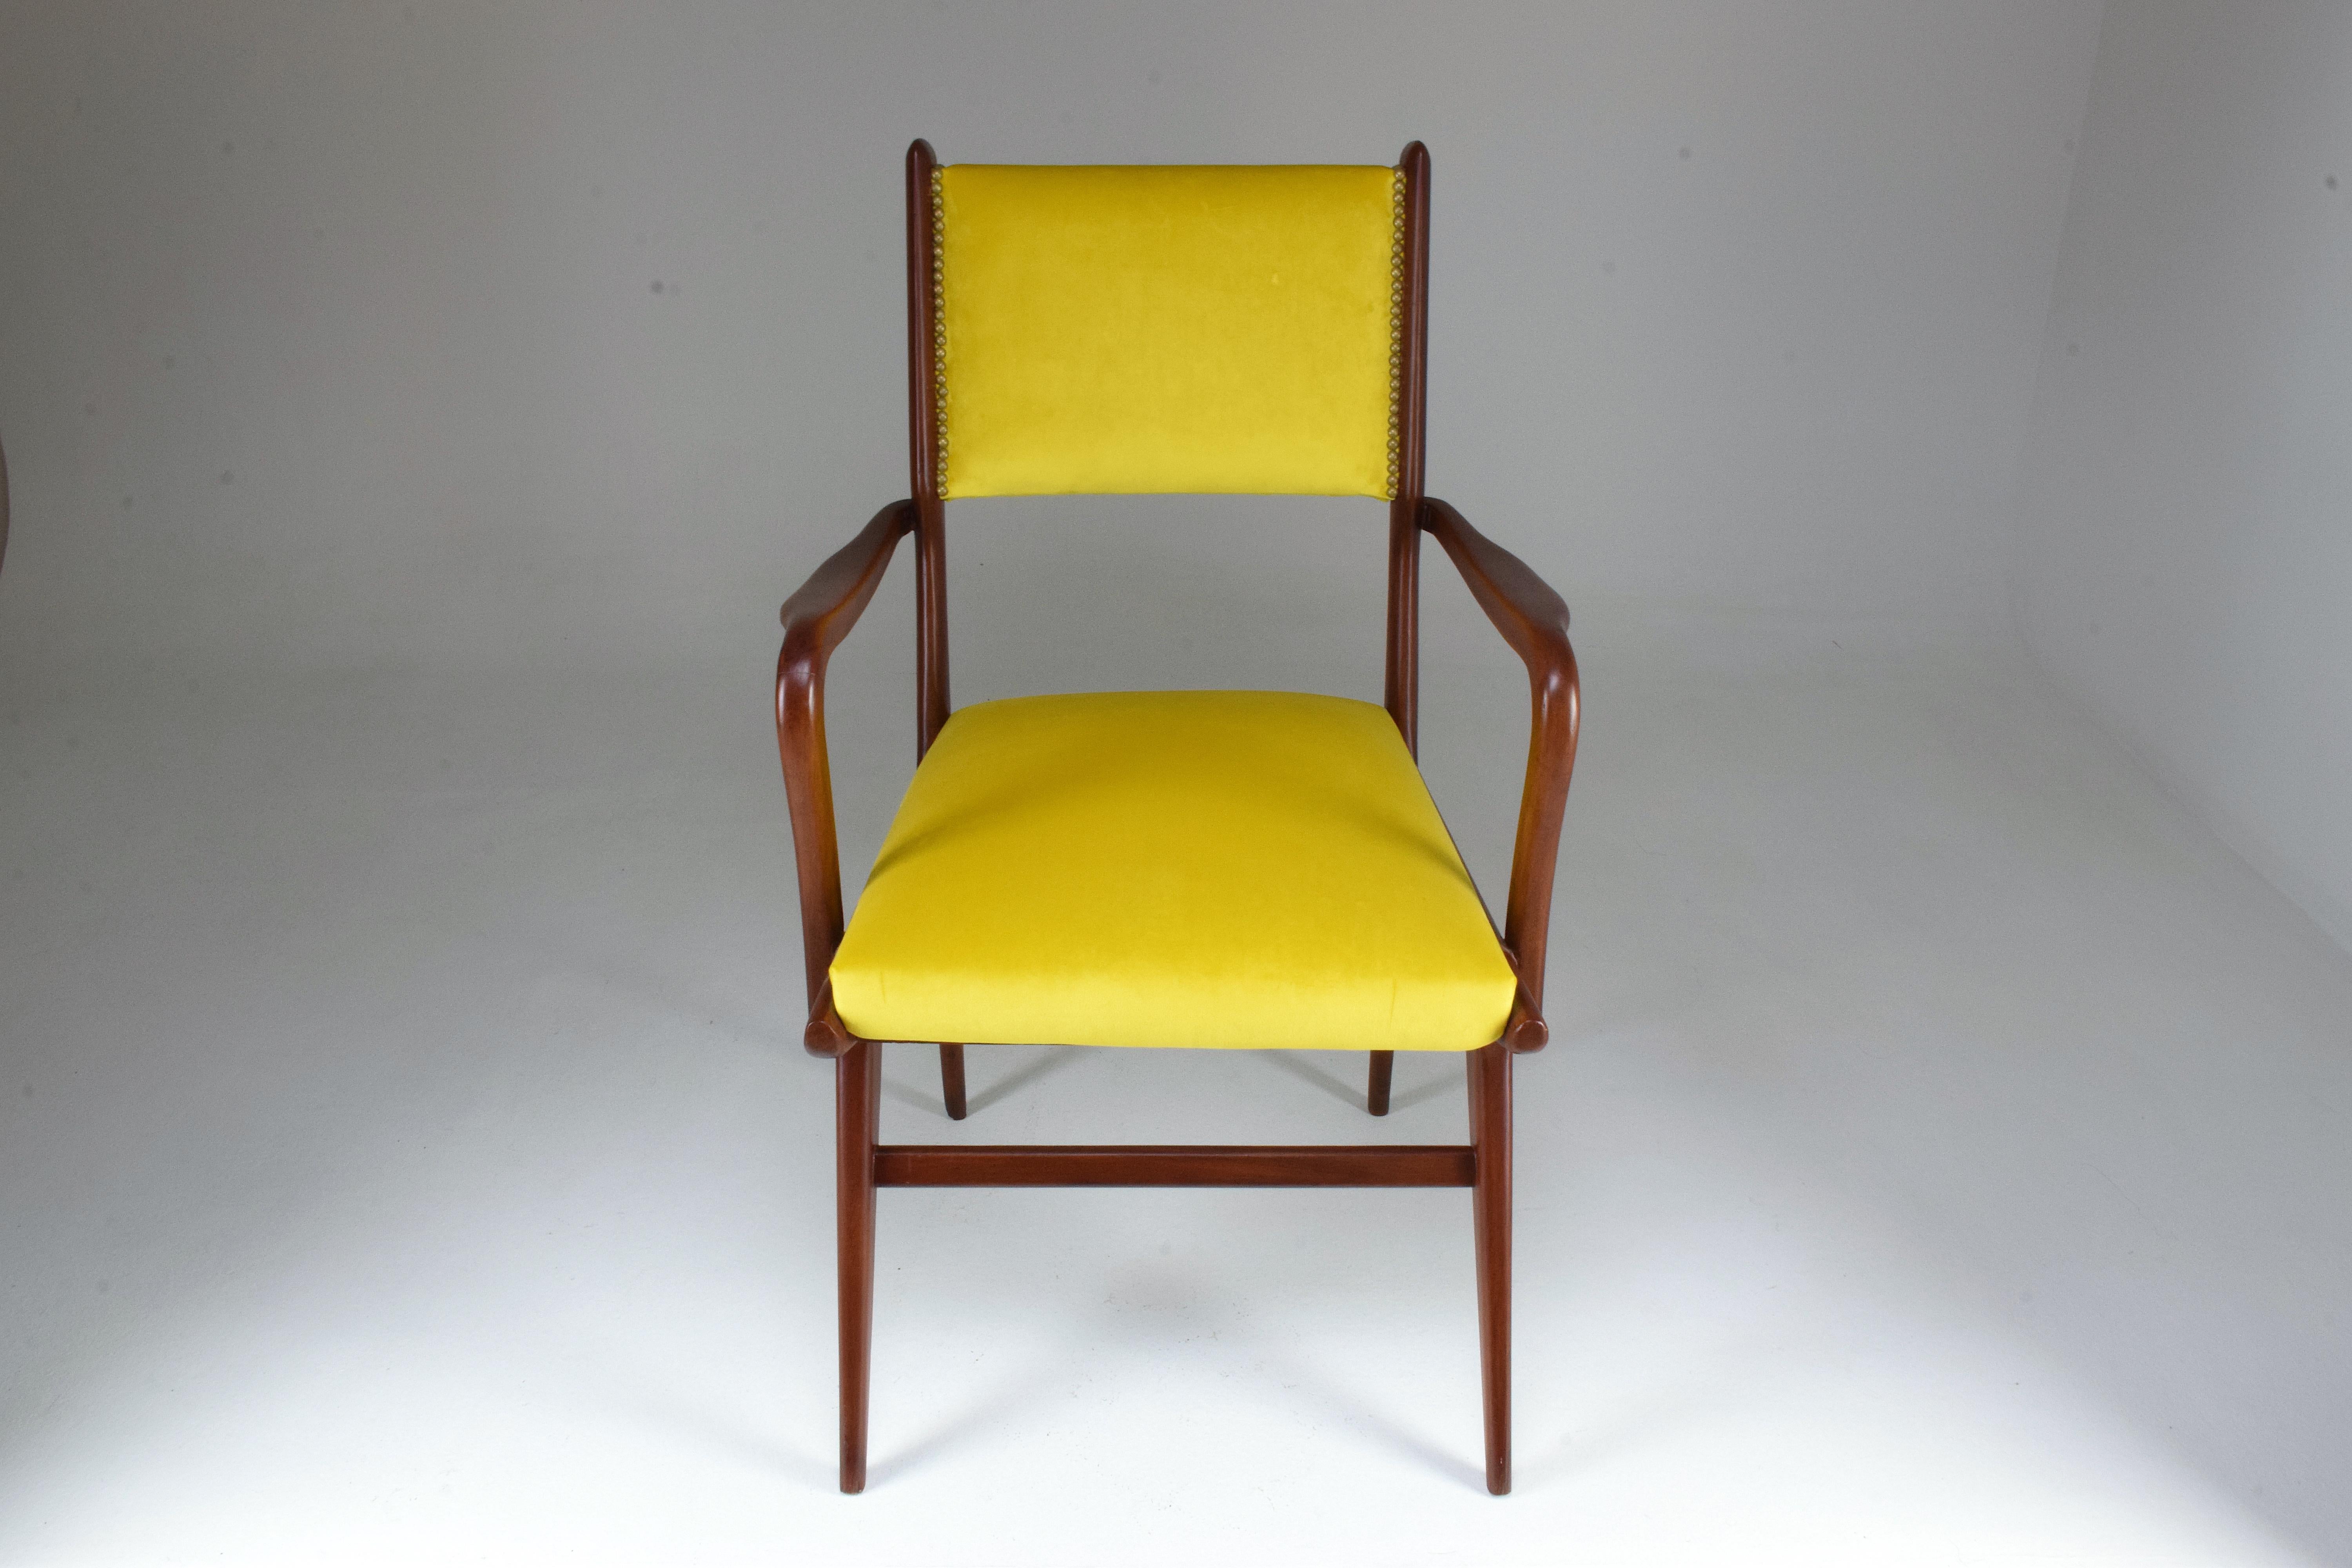 A 20th century vintage Italian armchair designed with curved armrests and splayed and tapered front legs with stretchers. This design piece is fully restored with yellow velvet upholstery and nailhead trims on the front and back of the seat rest.